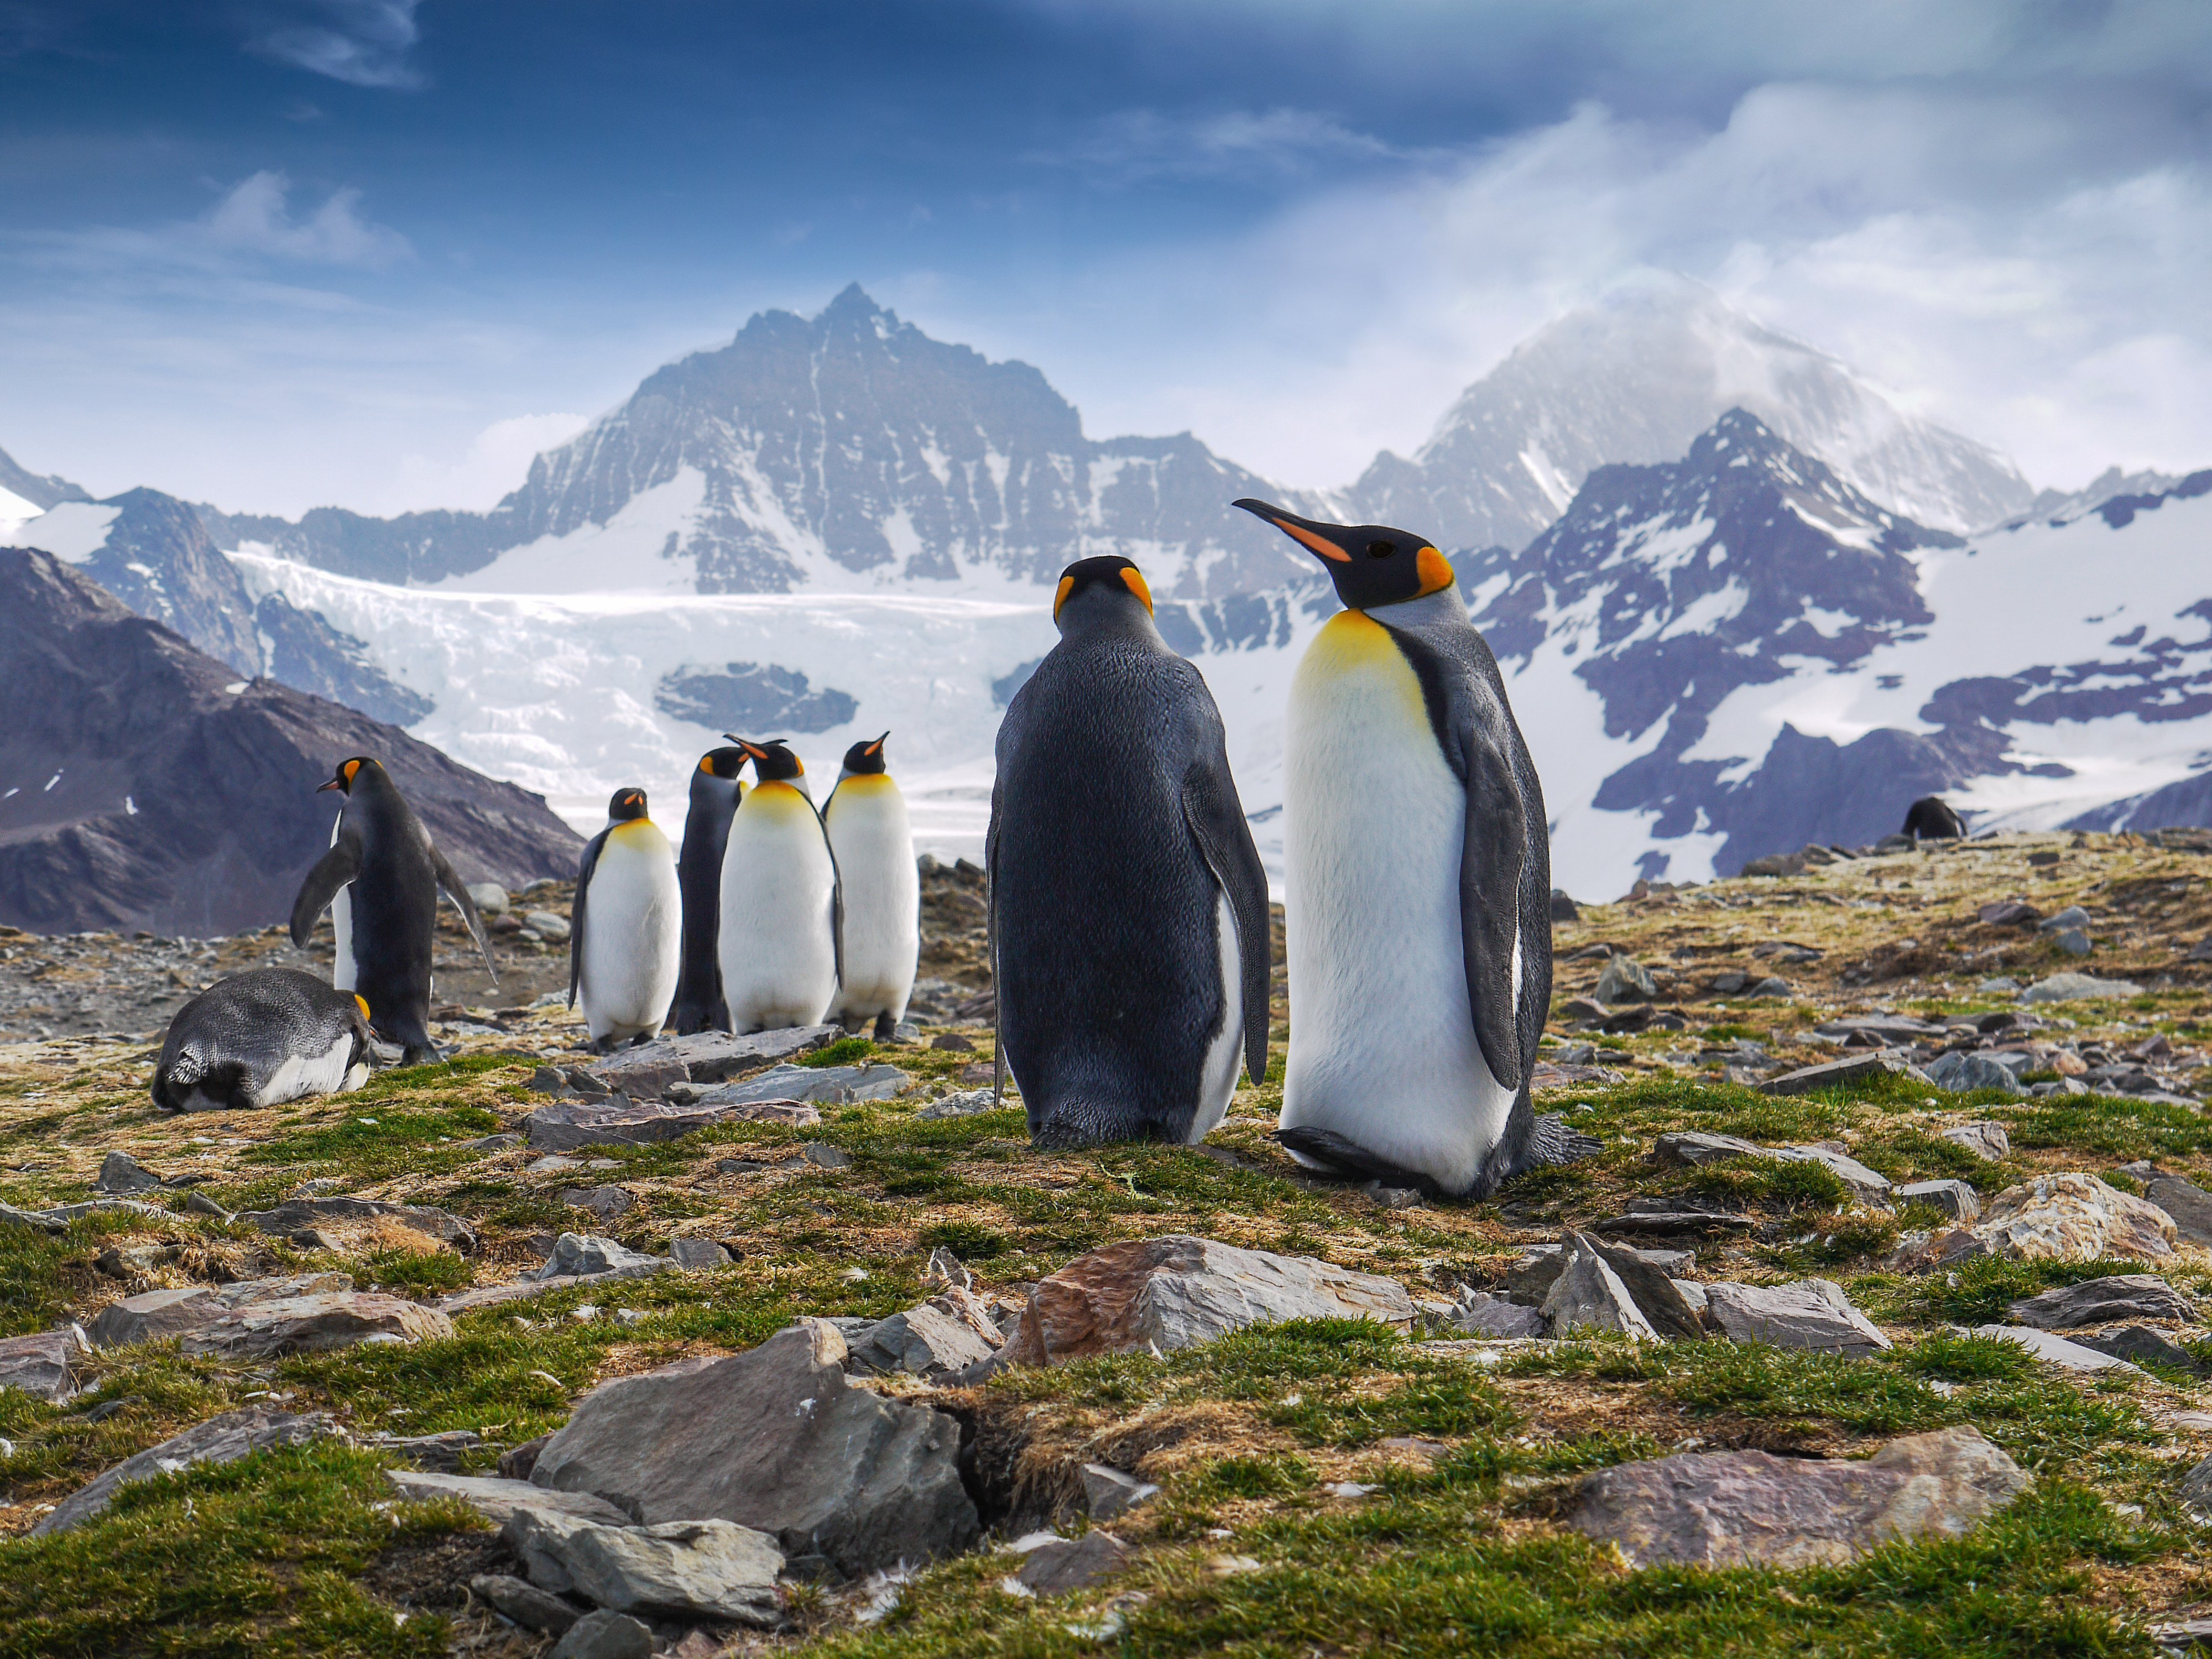 King penguins on South Georgia Island in the South Atlantic Ocean. Photo: Shutterstock